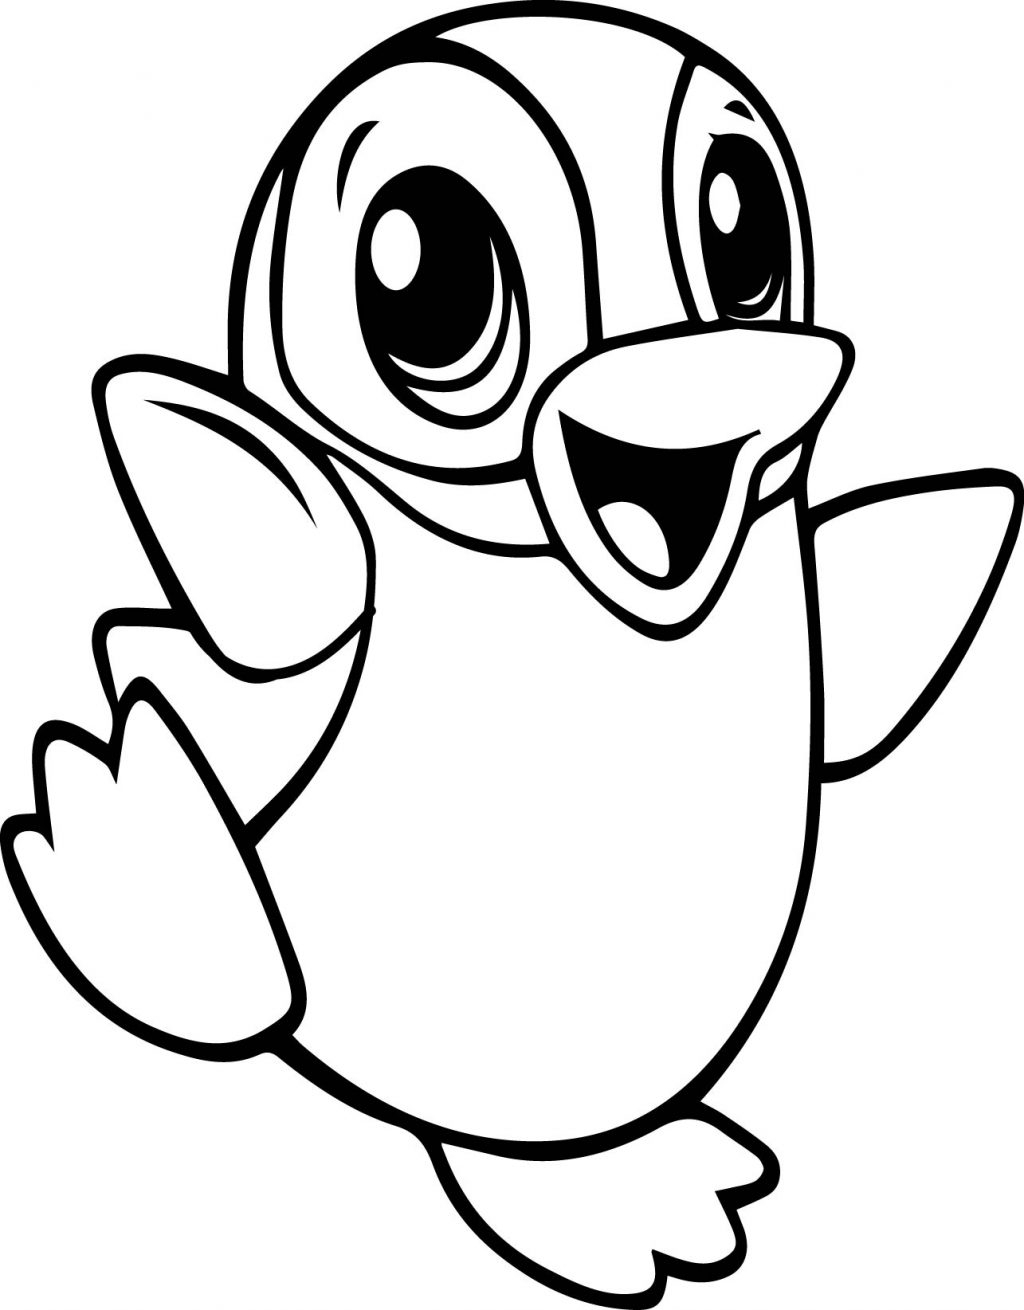 Cute Penguin Coloring Pages at GetColorings.com   Free printable ...